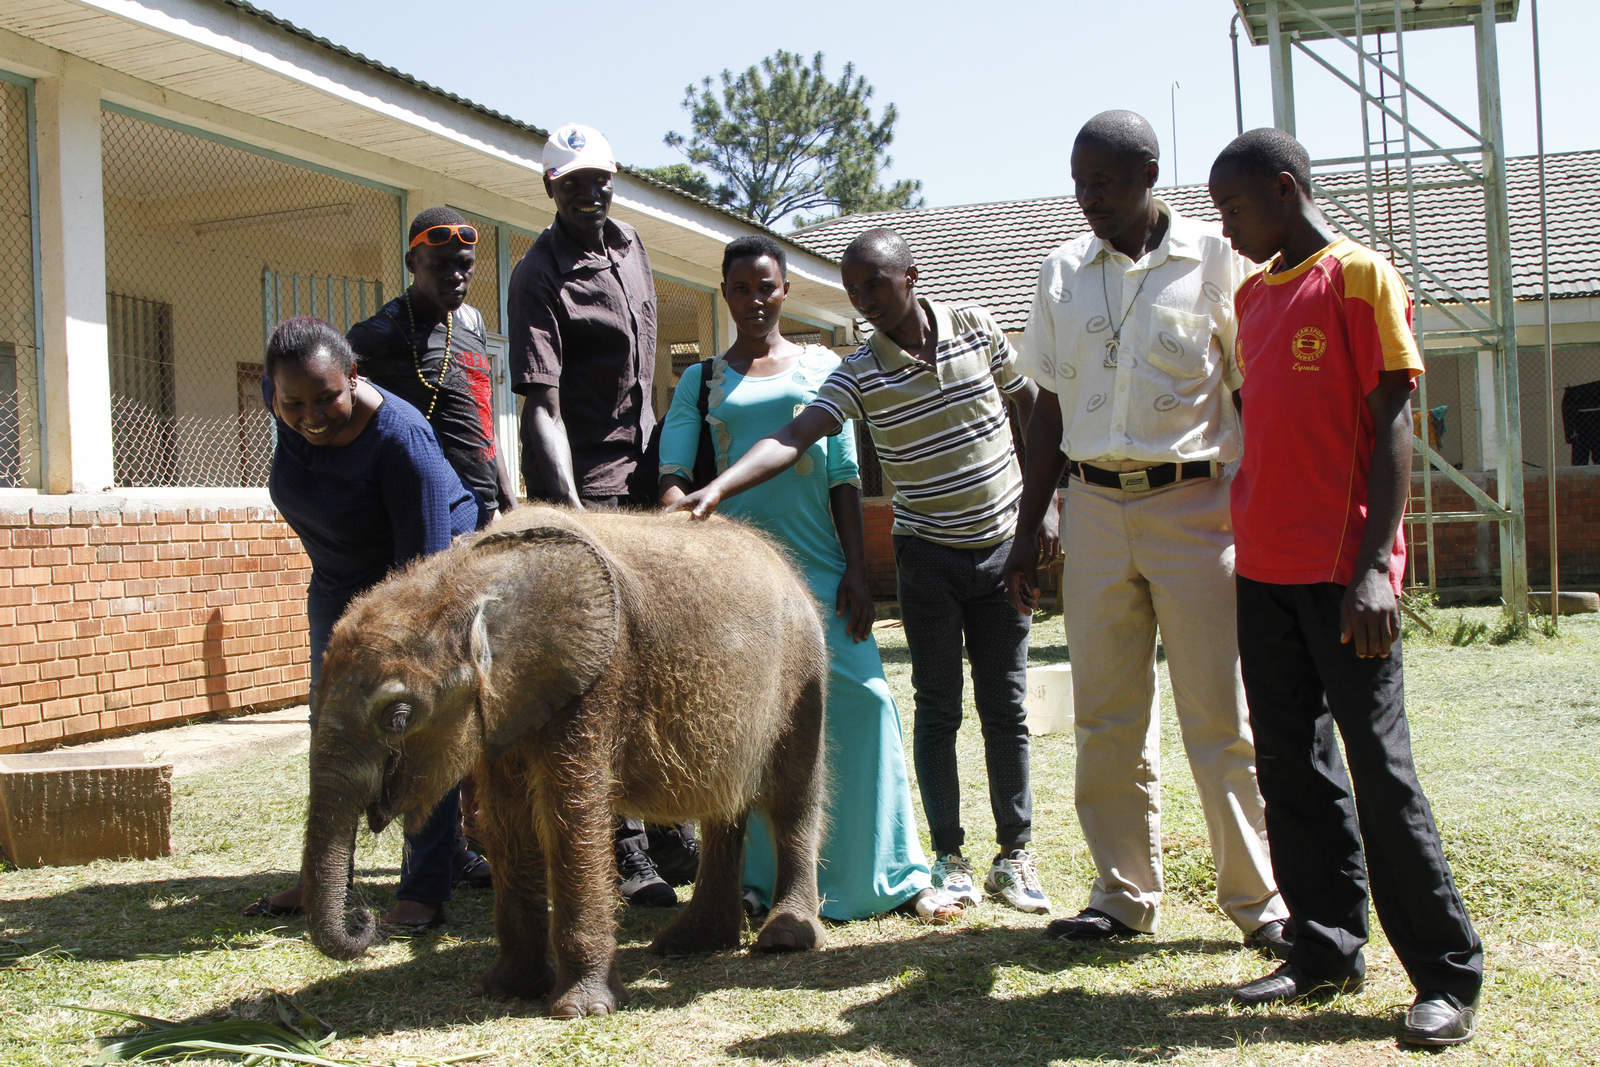 bcf guests visit the zoo.